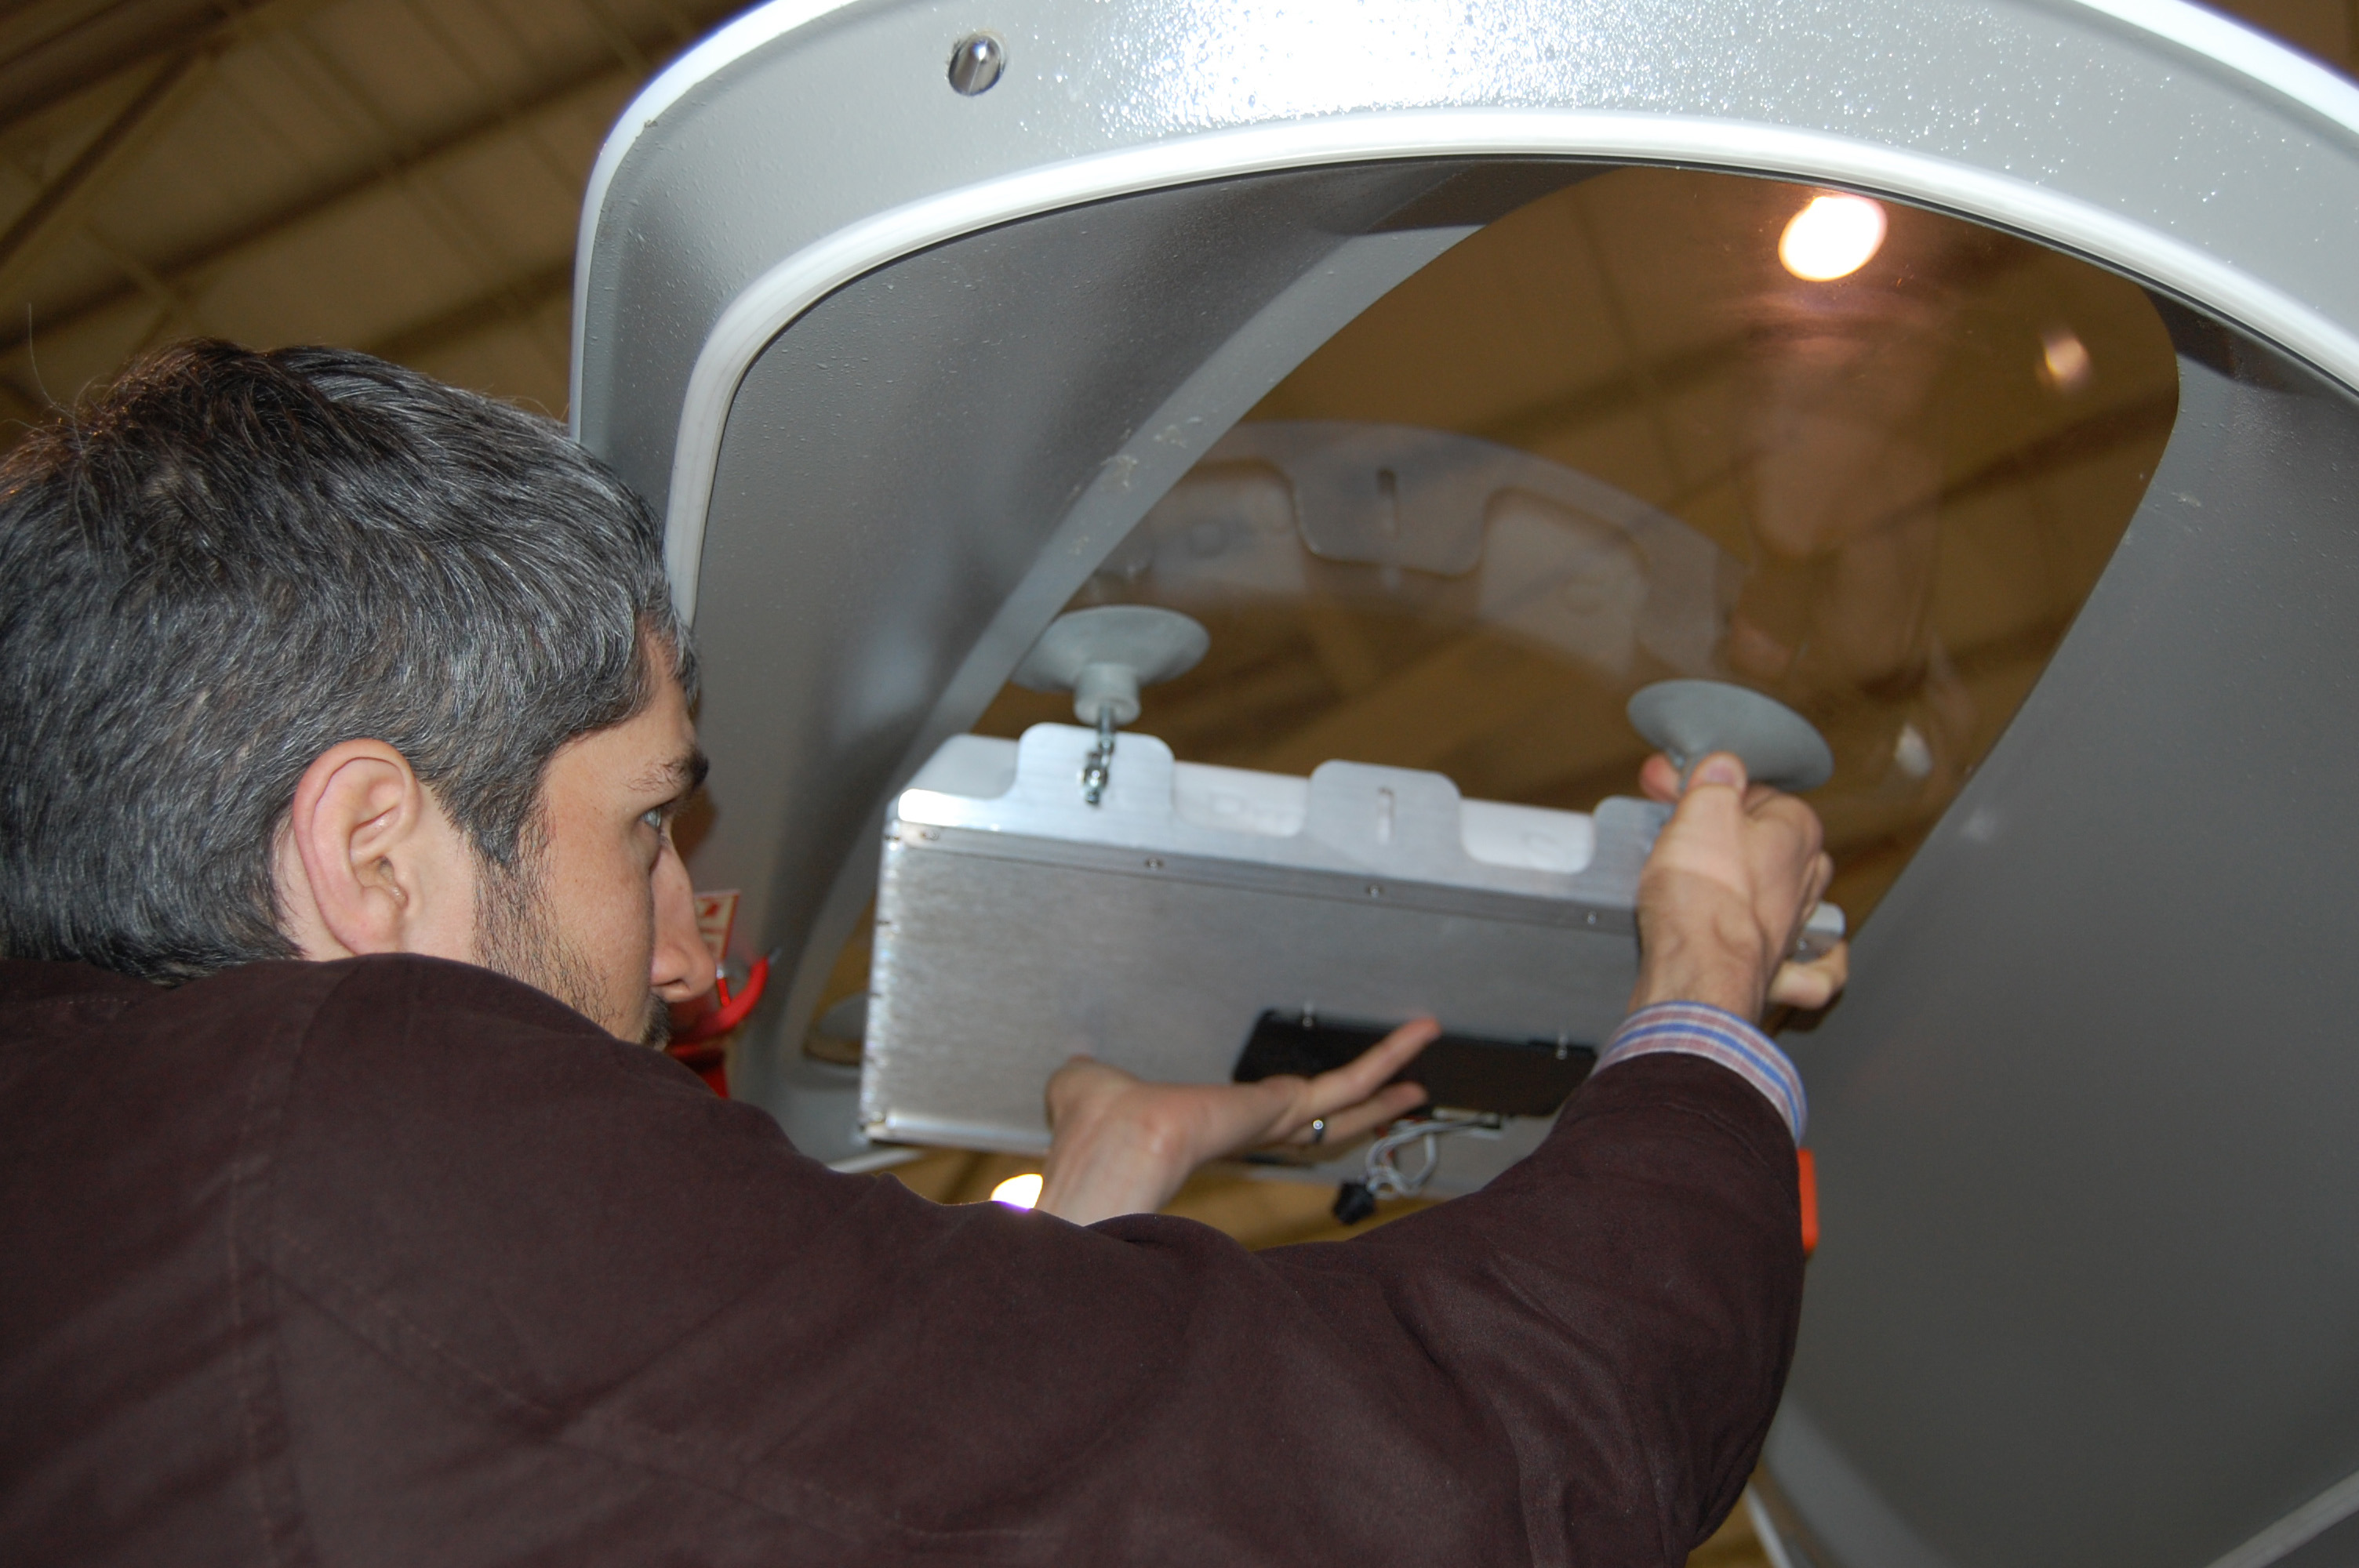 An Agile Aperture Antenna is placed in a window of an aircraft for a recent test flight. The software-defined, electronically-reconfigurable antenna can change beam directions in a thousandth of a second. Its light weight and low power requirements make it ideal for use in UAVs. (GTRI photo)